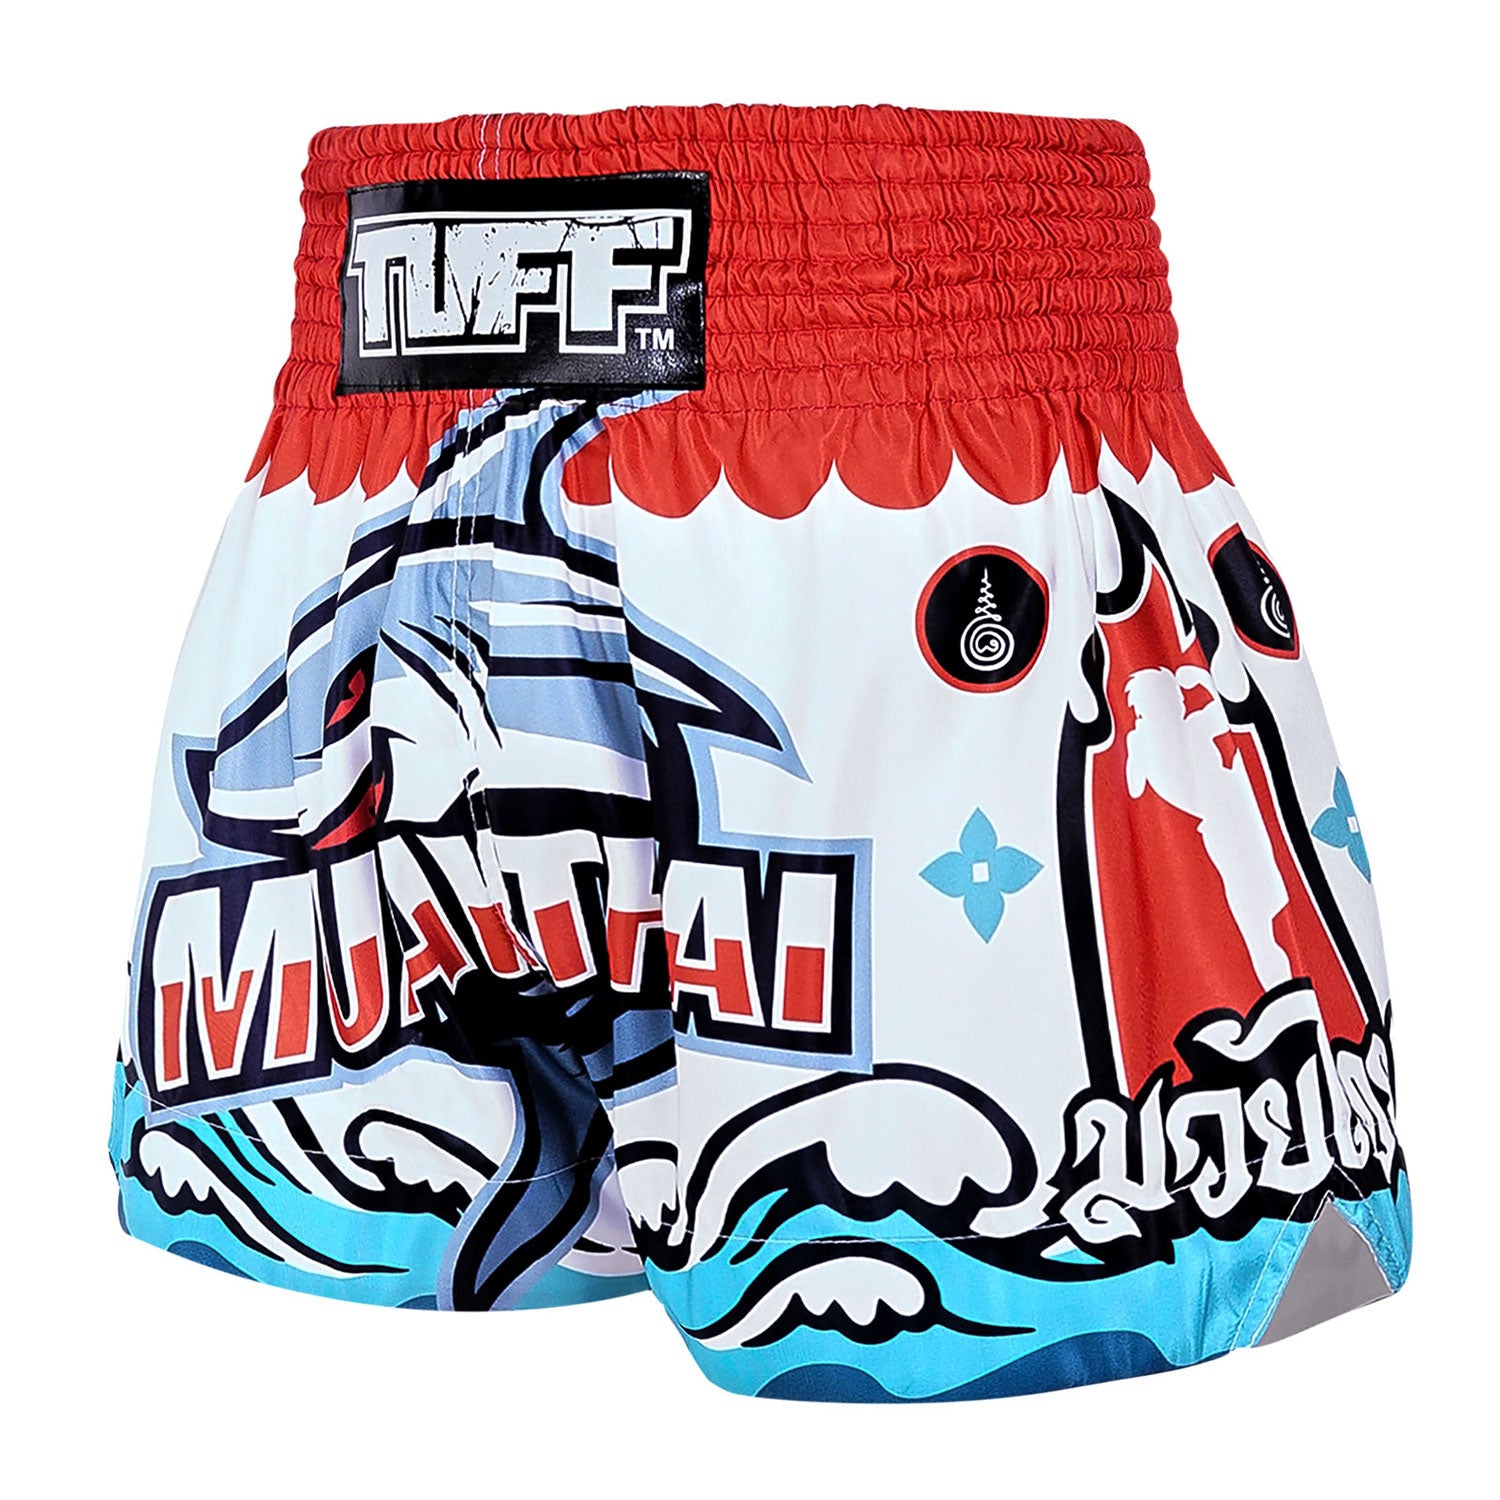 MS674 TUFF Muay Thai Shorts The Fearless One